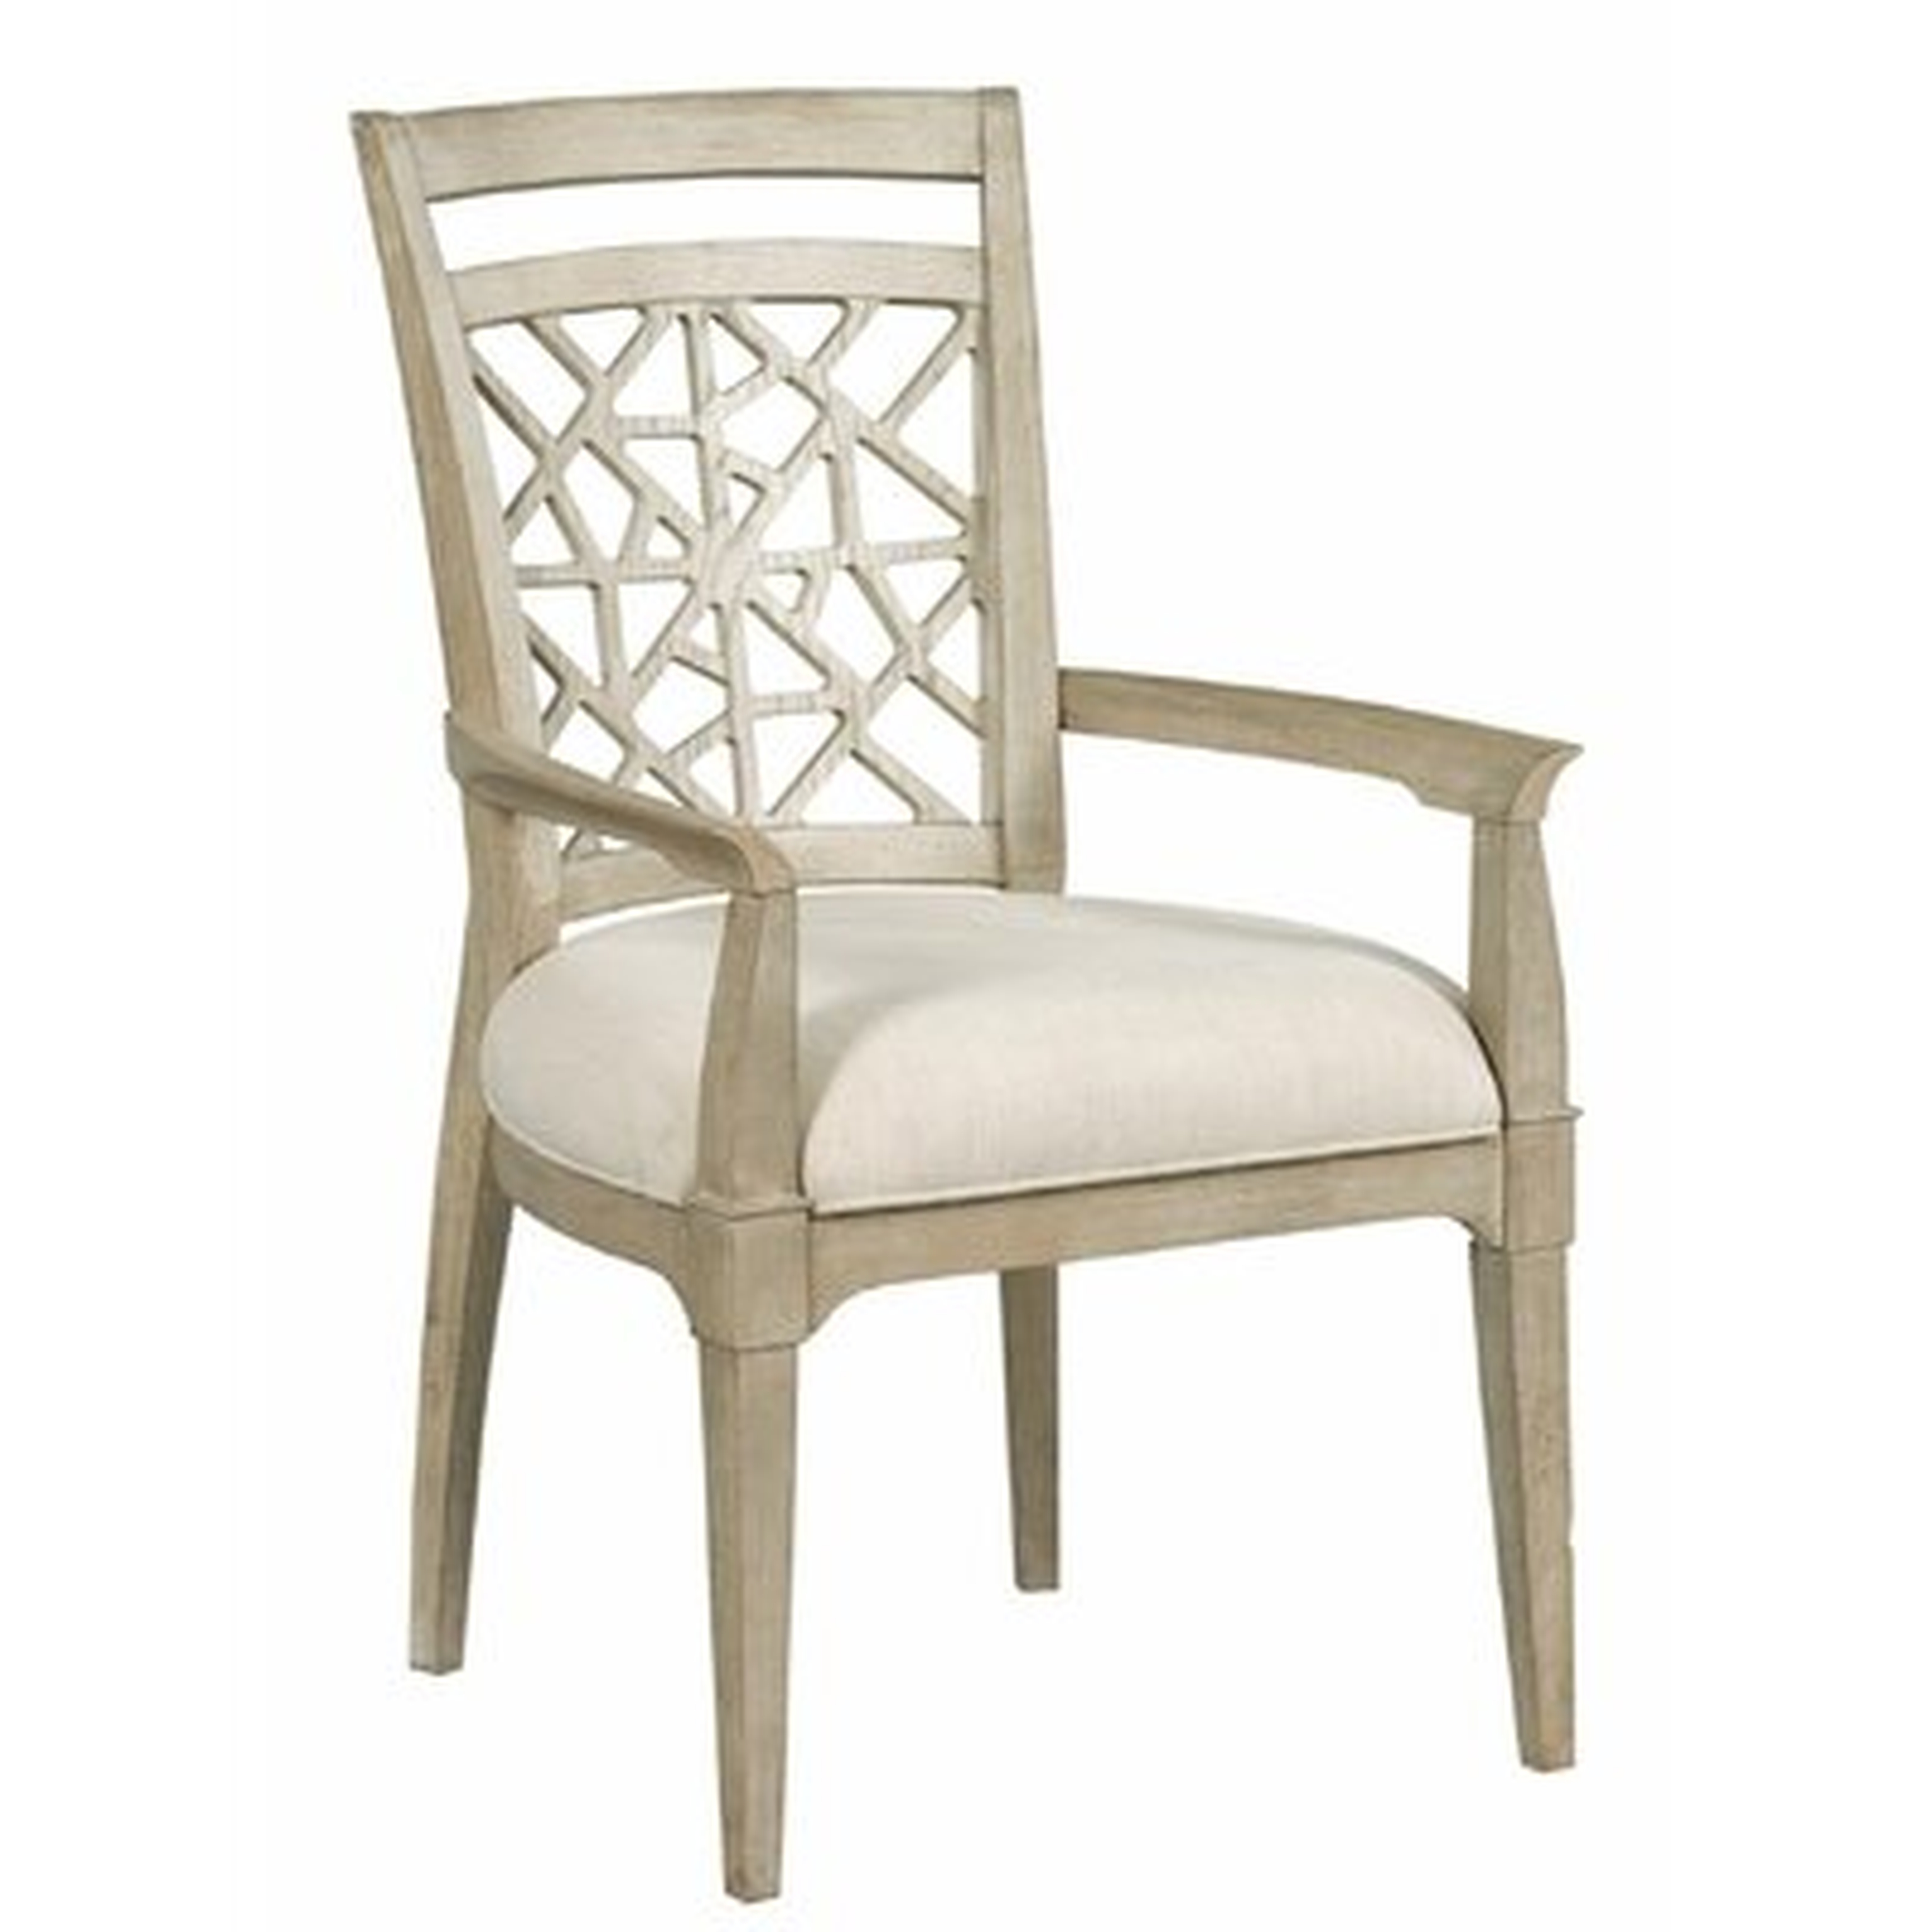 Rodgers Upholstered Arm Chair in Oyster (Set of 2) - Wayfair